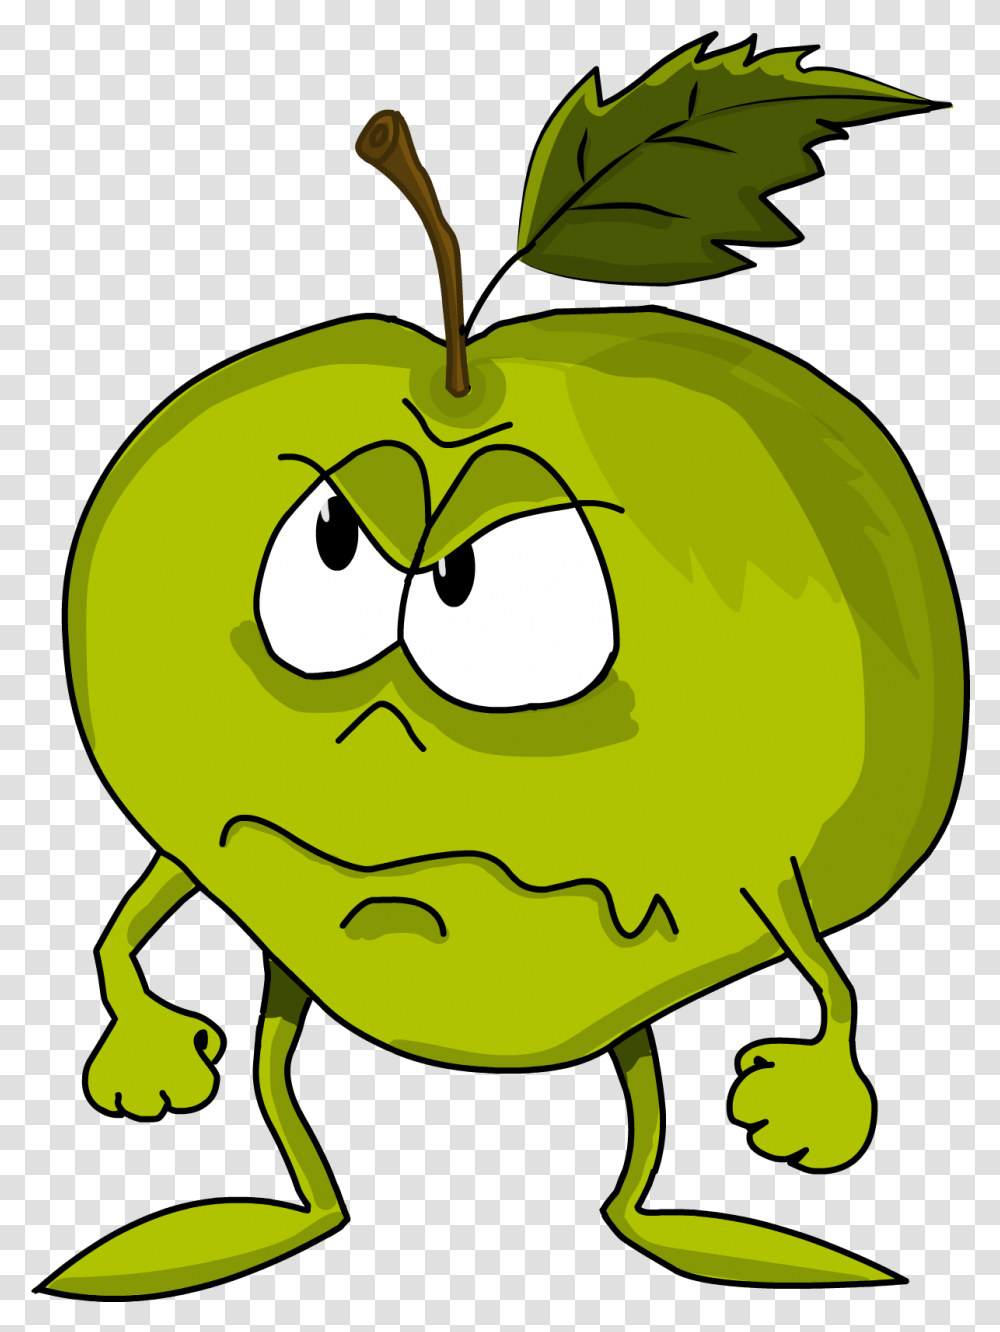 Angry Cartoon Apple Drawing Free Image Reaction Of Acids With Metal Oxides, Plant, Green, Leaf, Produce Transparent Png